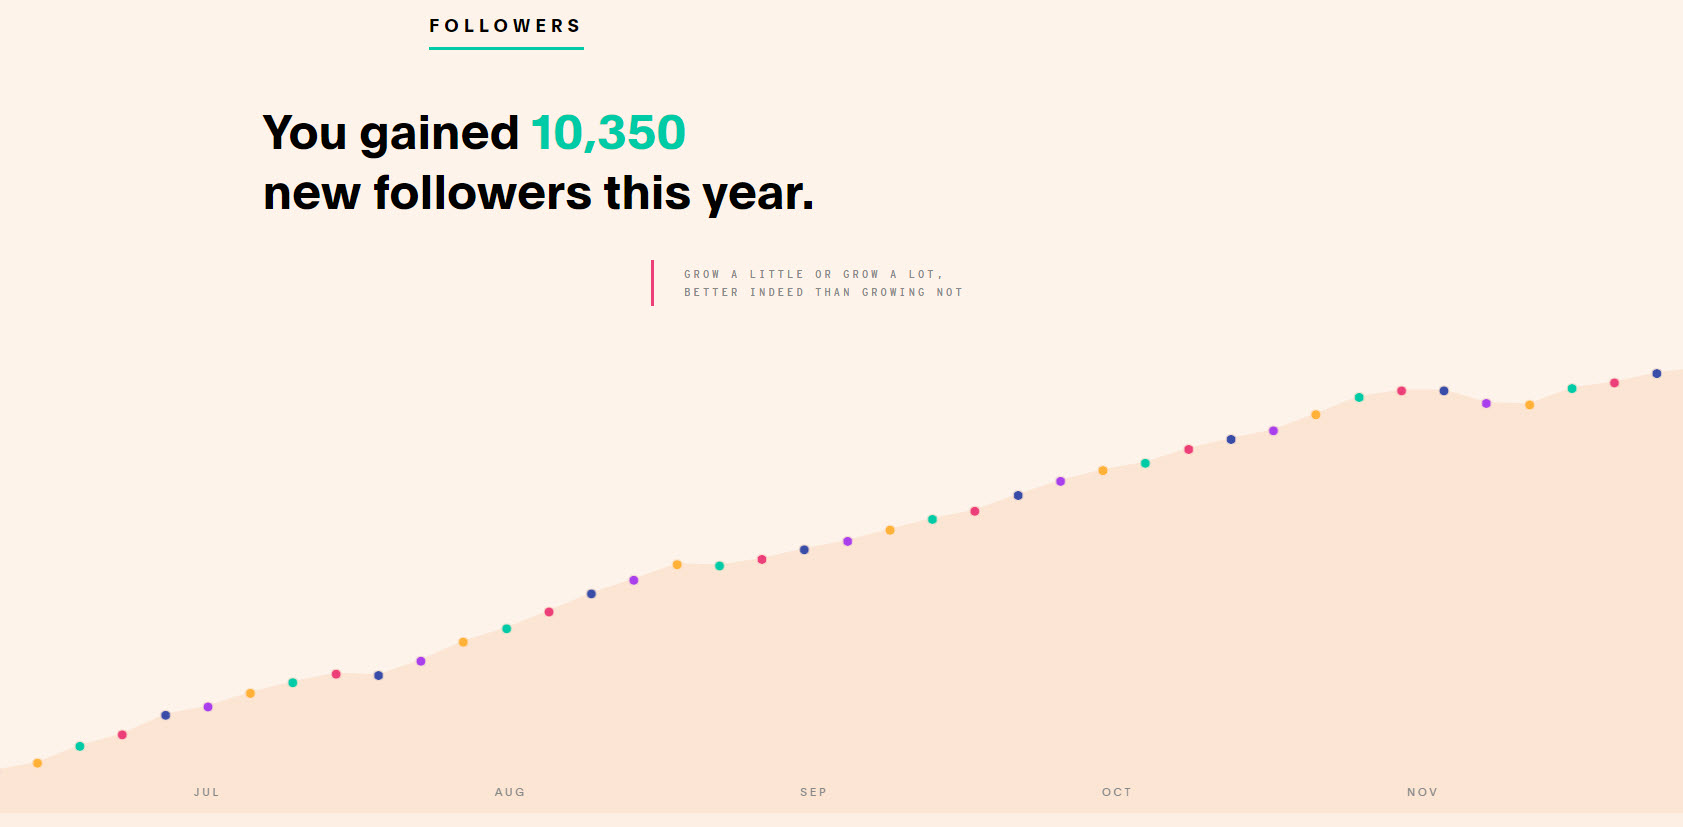 INSTAGRAM: Luciano Blancato (@thexeon) - 2018 - review. In 2018, 10350 new followers